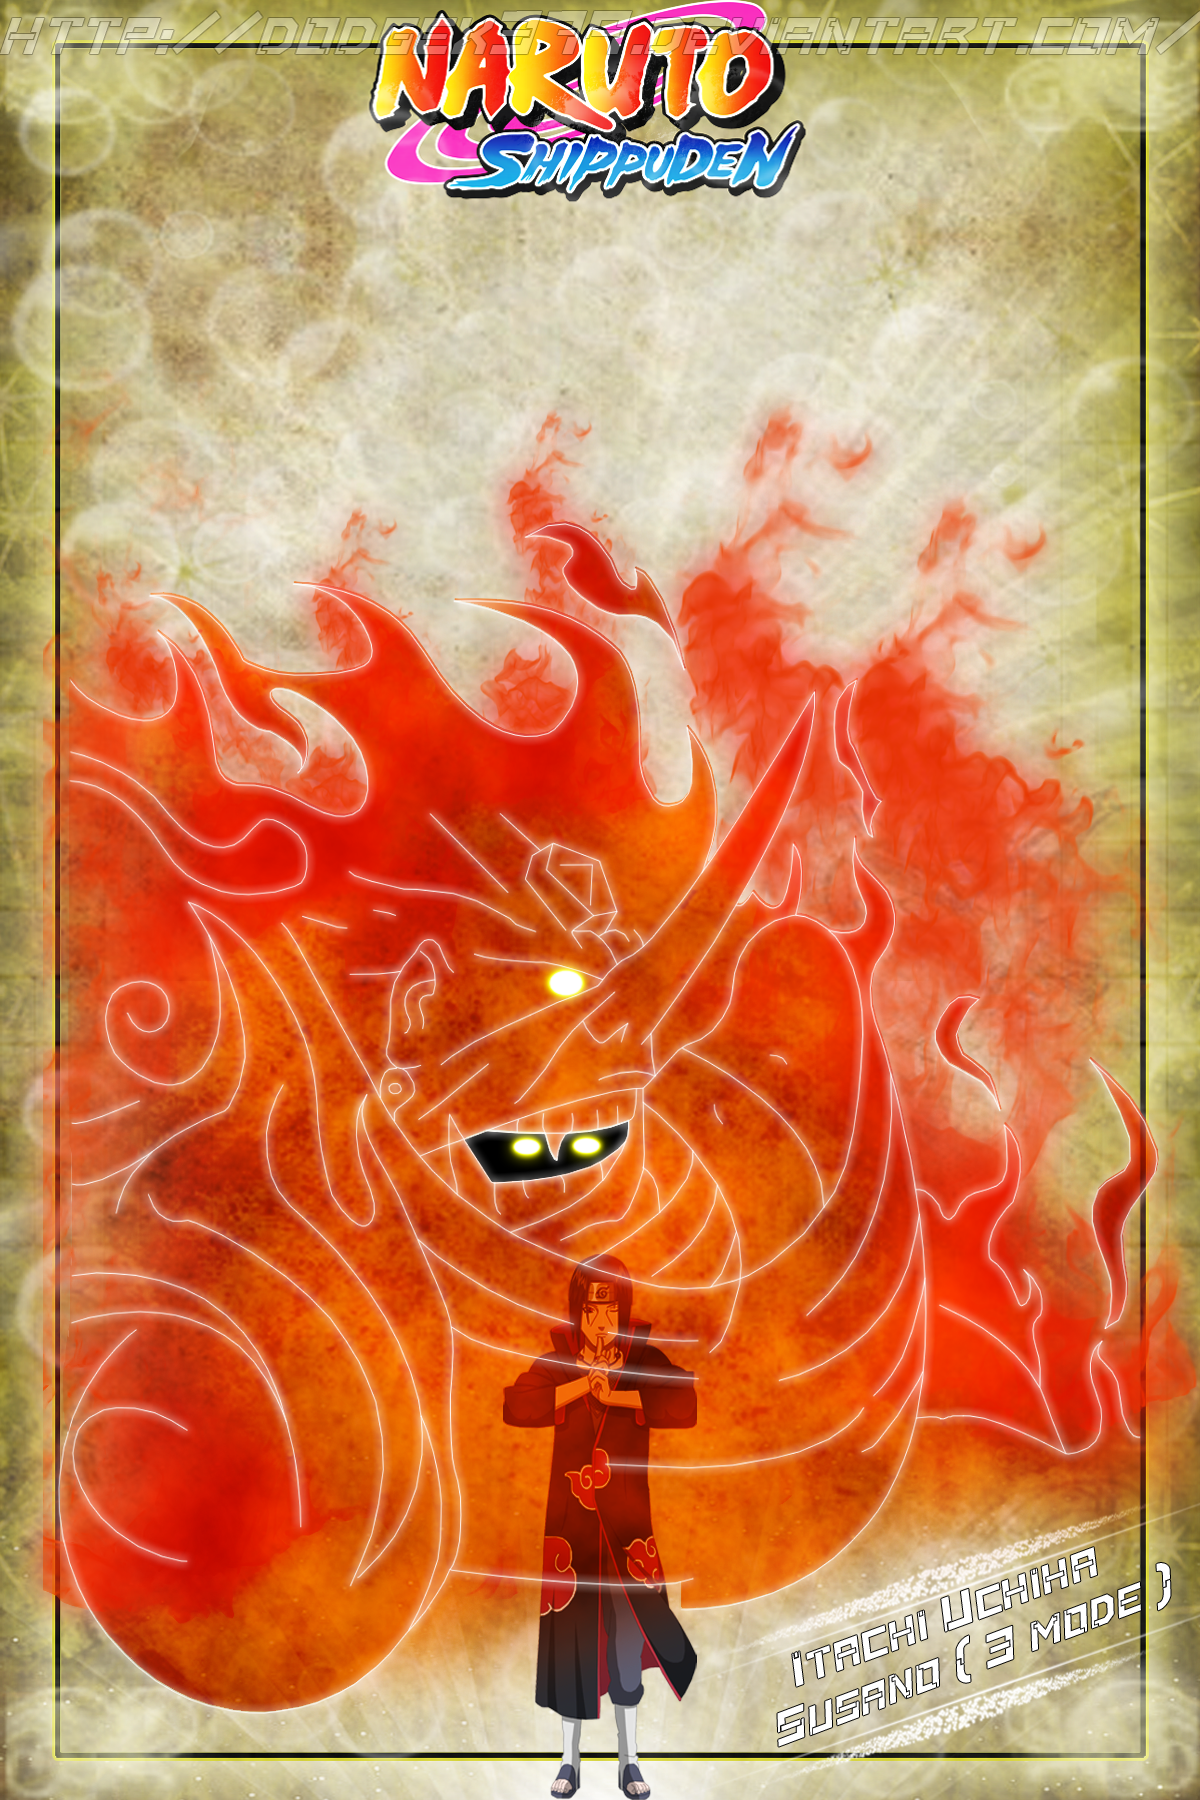 Itachi Susanoo - Adventure Time style by Musical-Coffee on DeviantArt